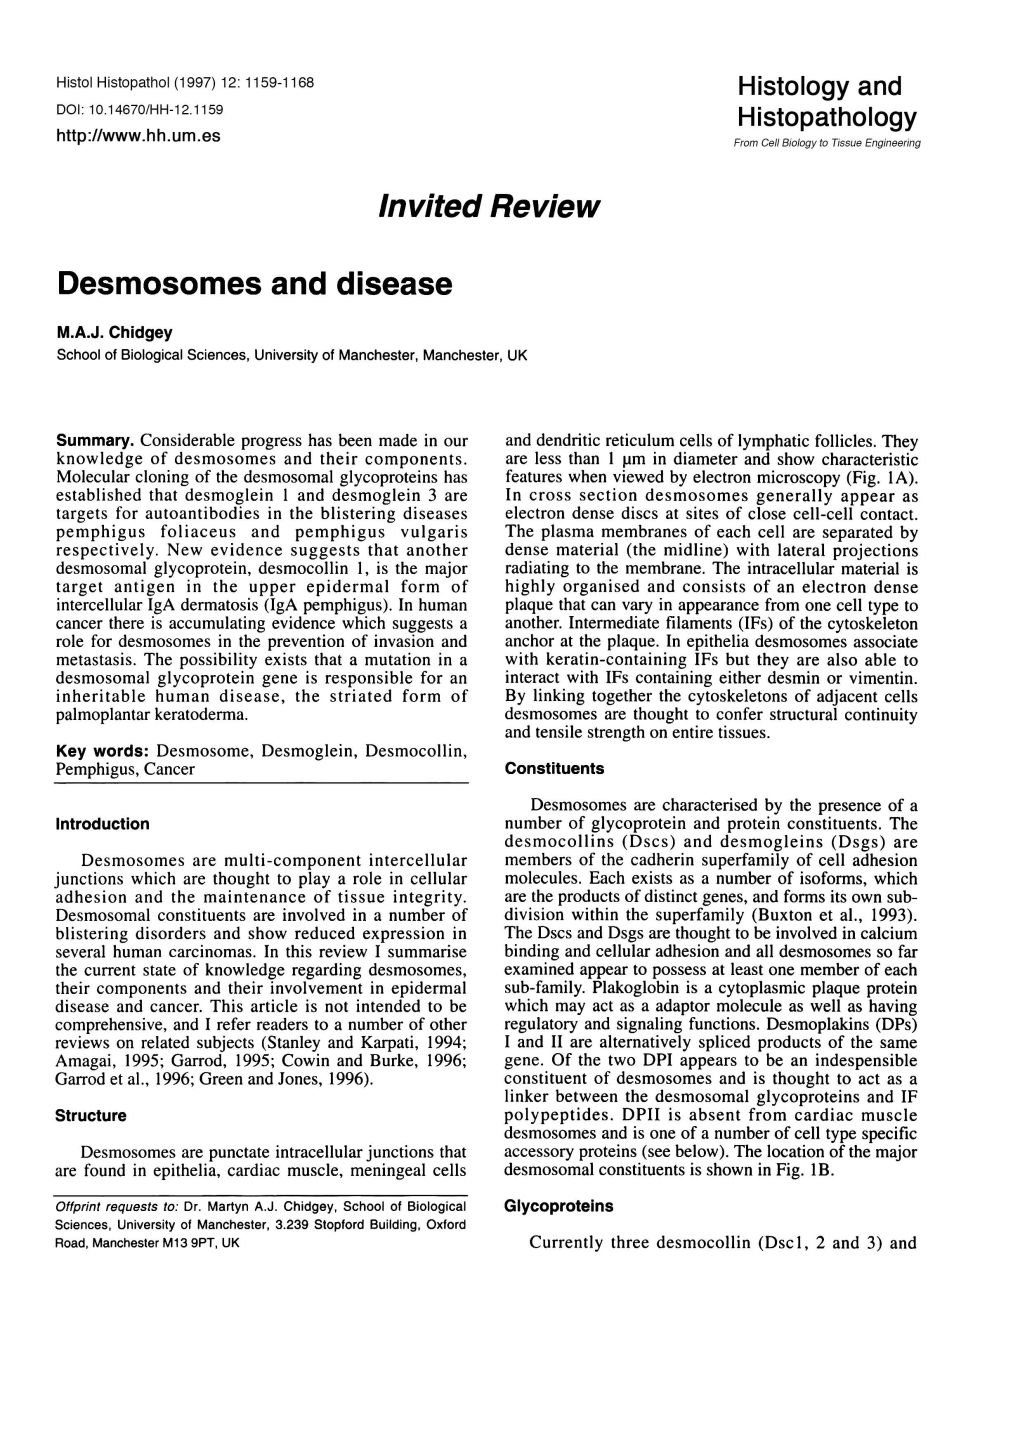 Invited Review Desmosomes and Disease